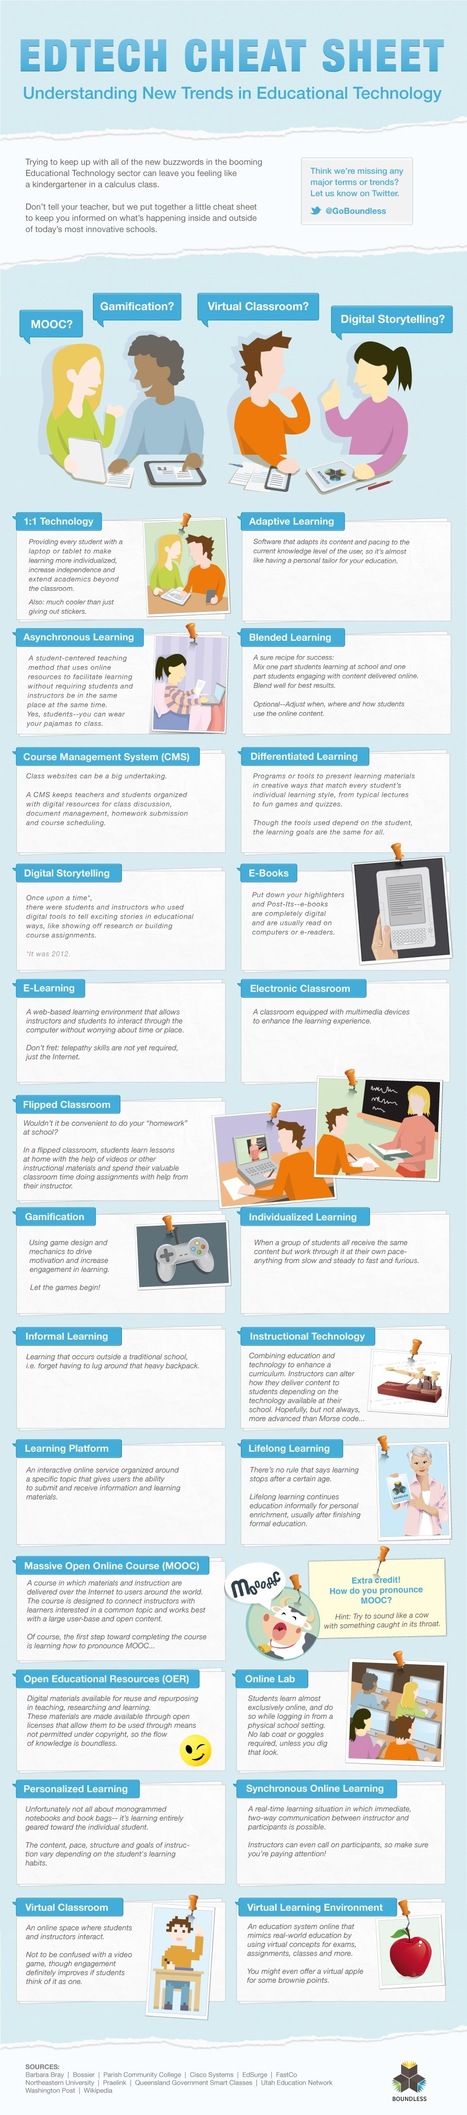 Educational Technology Buzzwords - Infographic | Digital Delights - Digital Tribes | Scoop.it